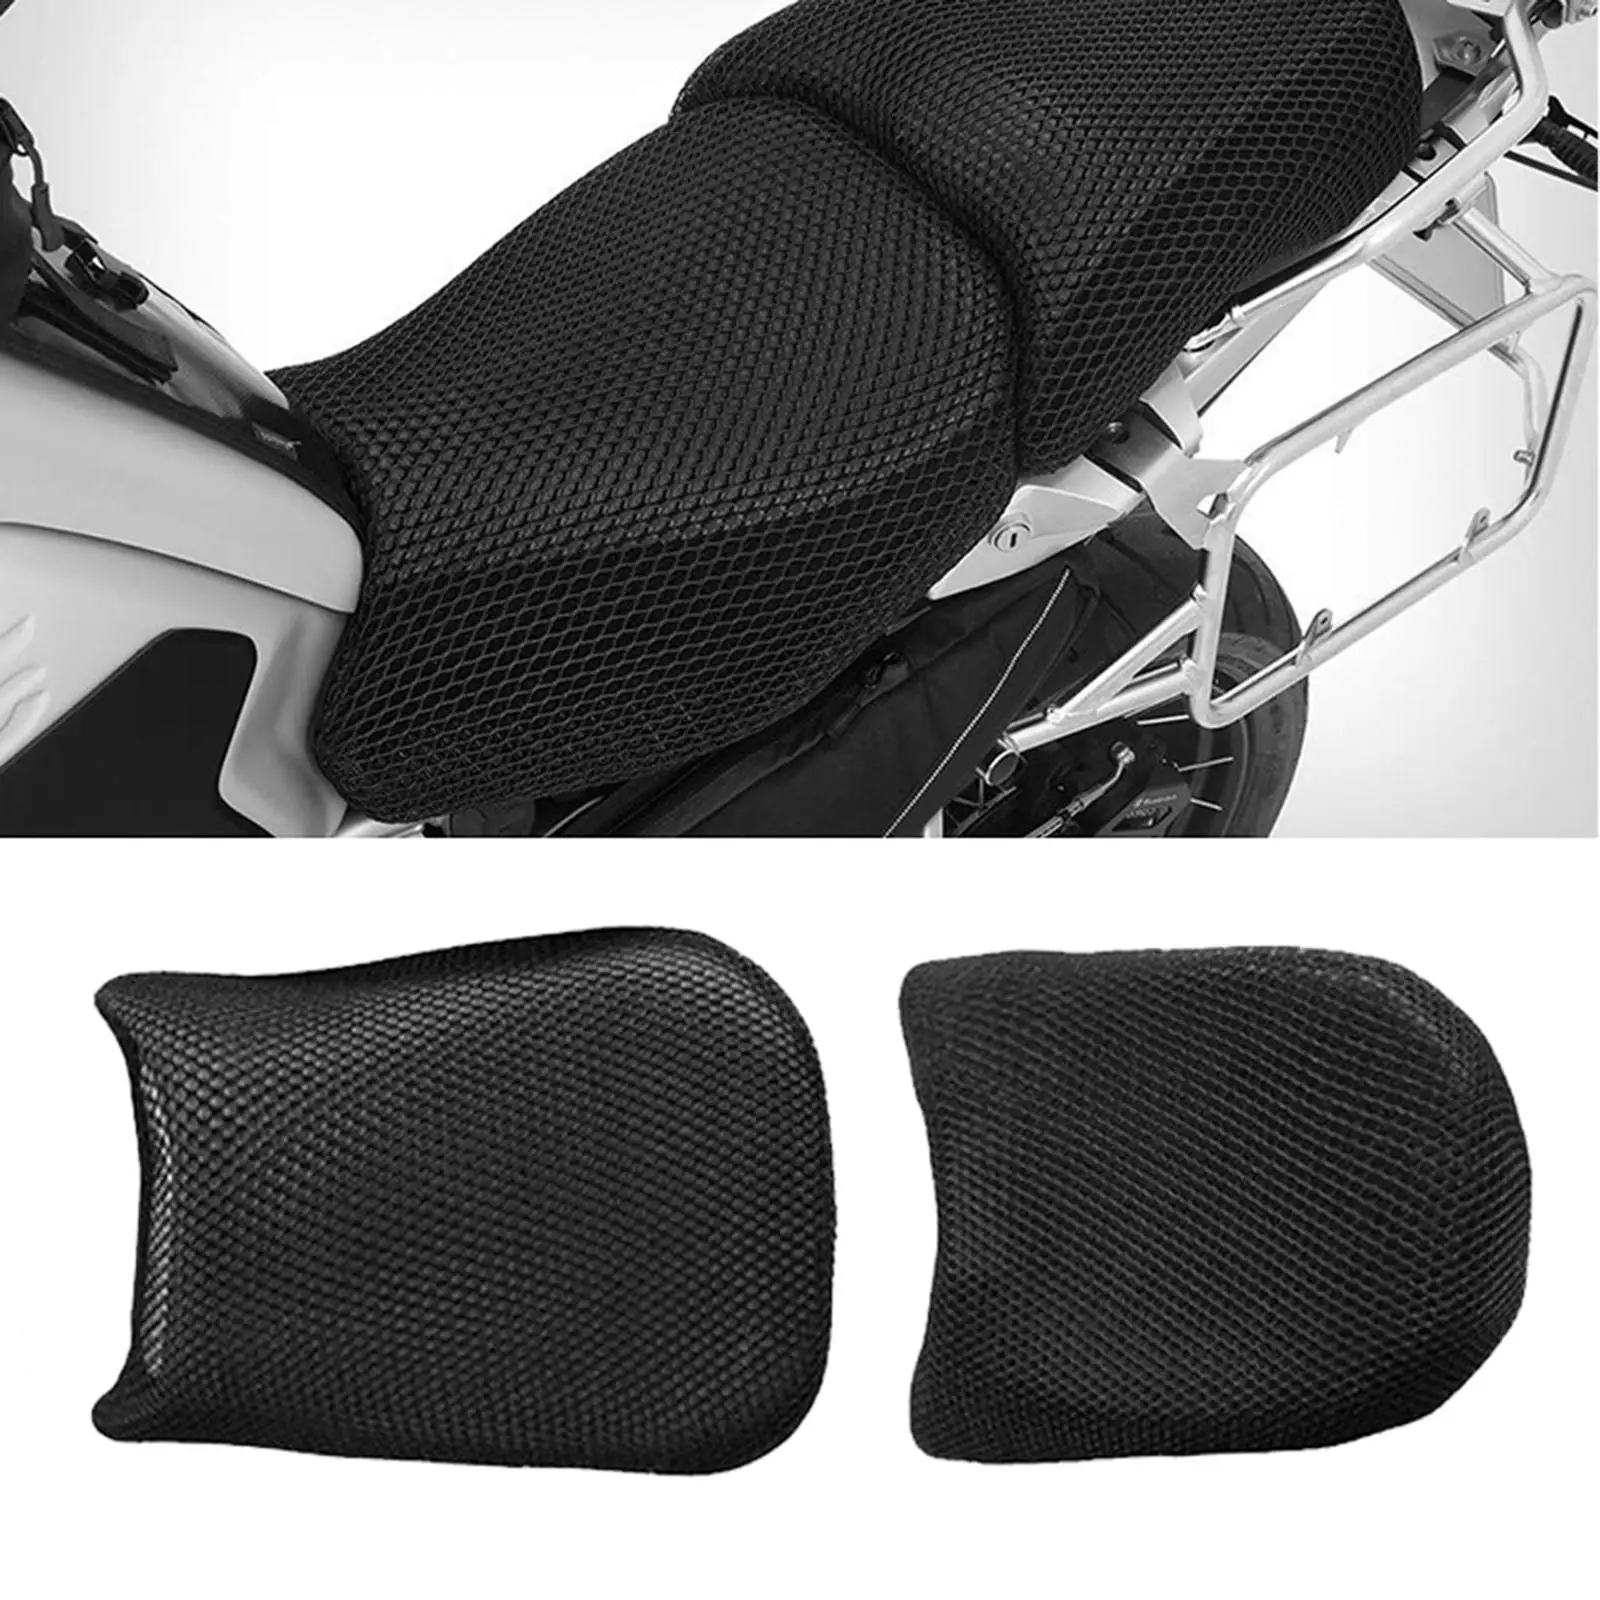 Sport Motorcycle Bikes Comfort Saddle Seat  Covers Comfortable Pressure  Accessories for   